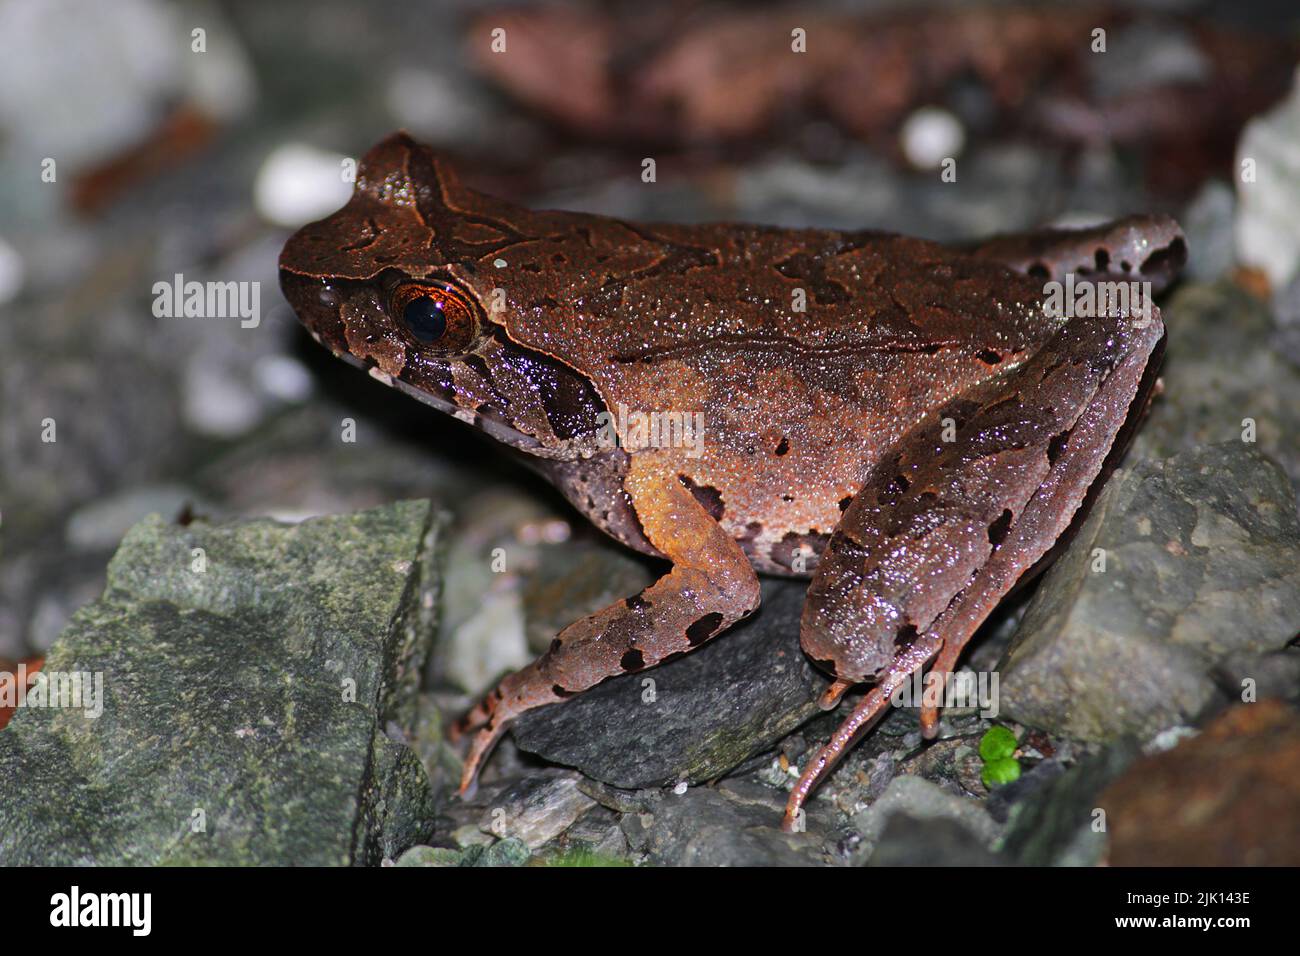 Mountain horned frog (Megophrys monticola) sitting on boulders of forest trail. Stock Photo